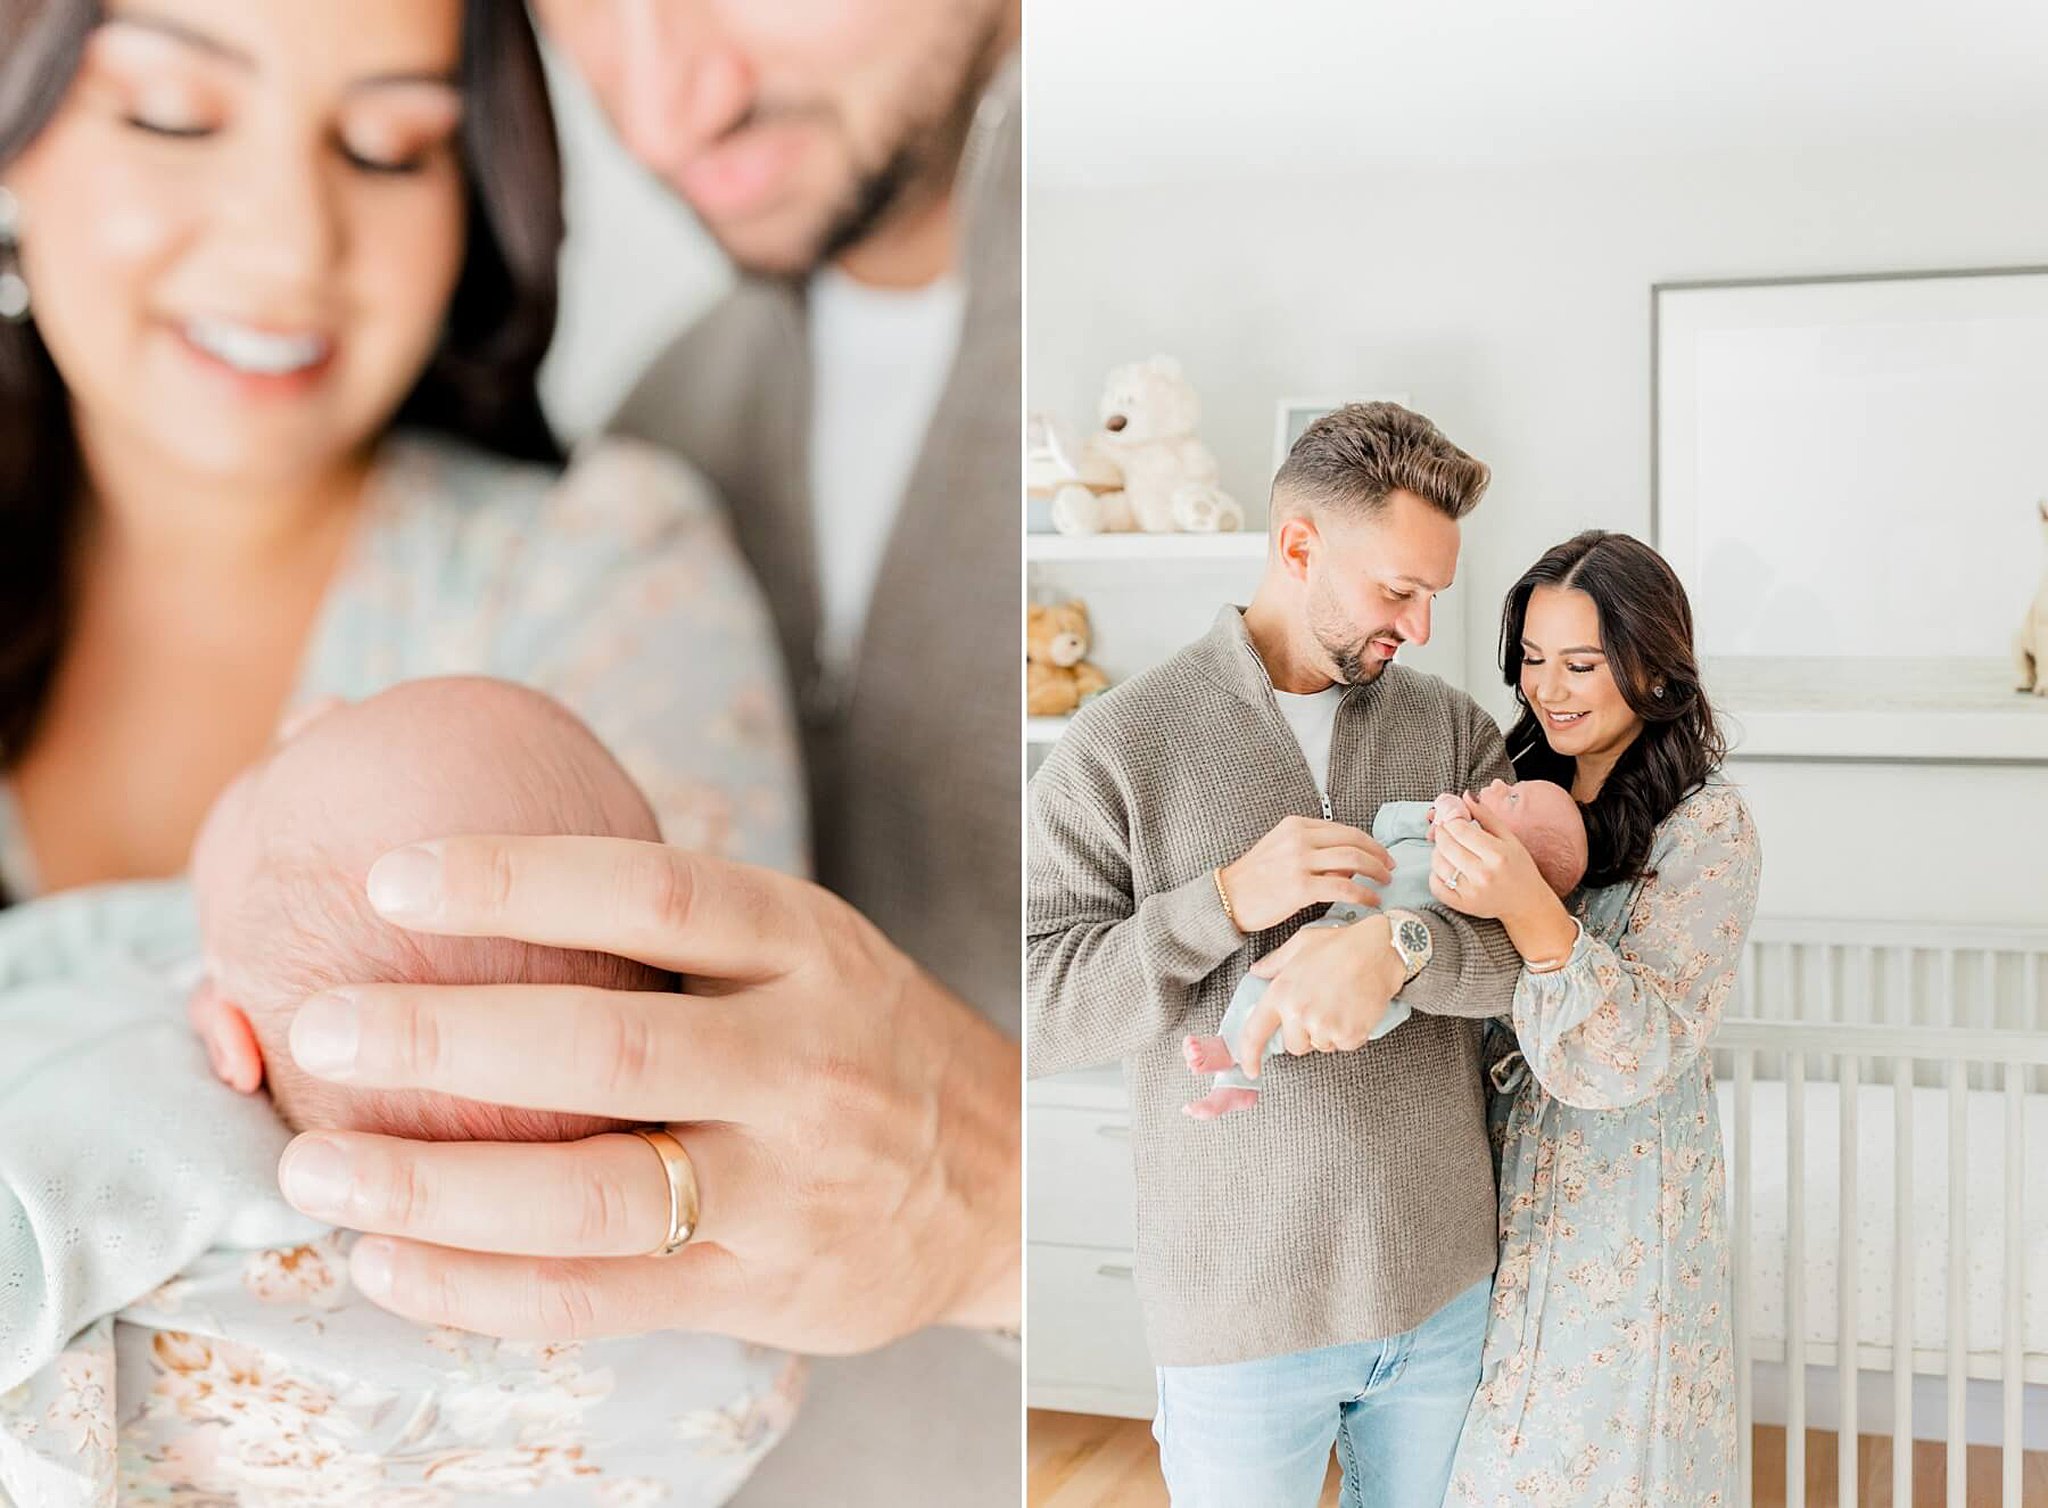 Mom and dad hold their newborn in their nursery in front of the crib and stuffed animals